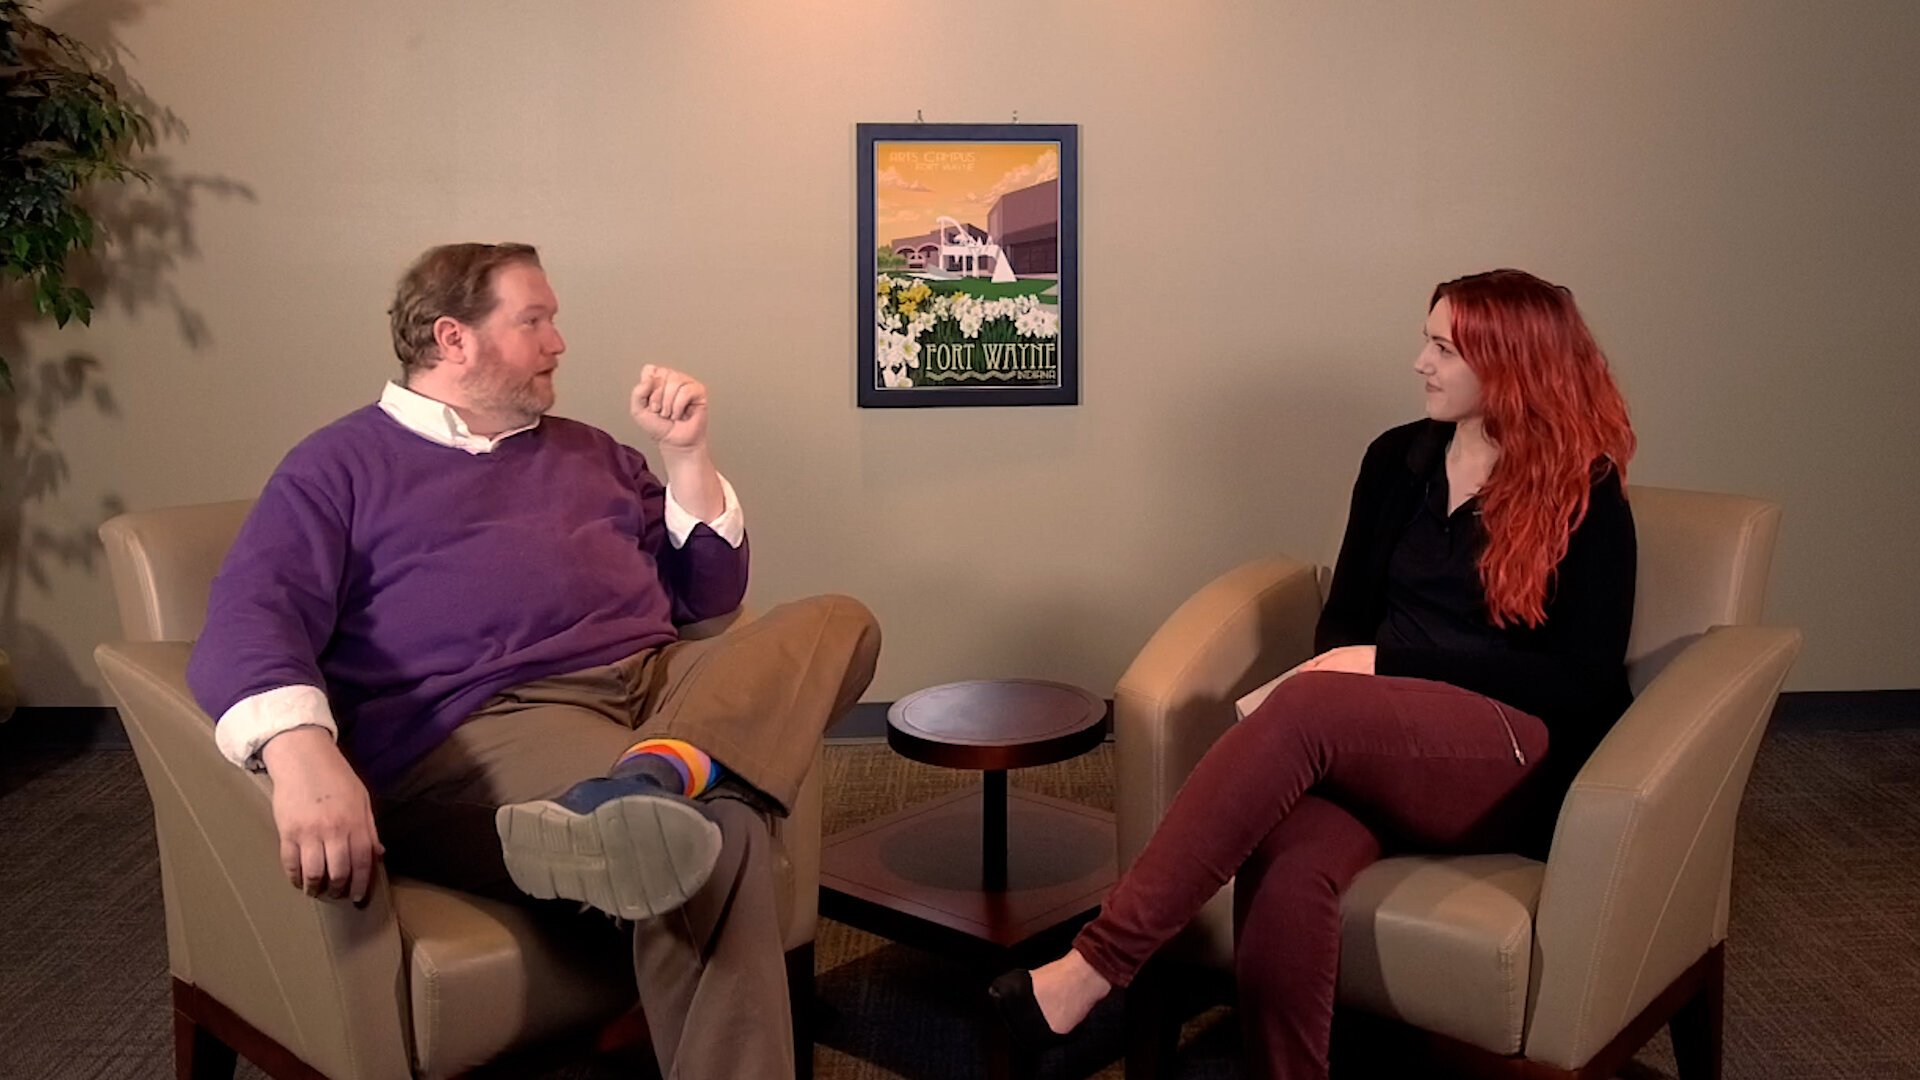 Christopher J. Murphy of Youtheatre and Rachelle Reinking of Arts United discuss theatre's impact in Fort Wayne.